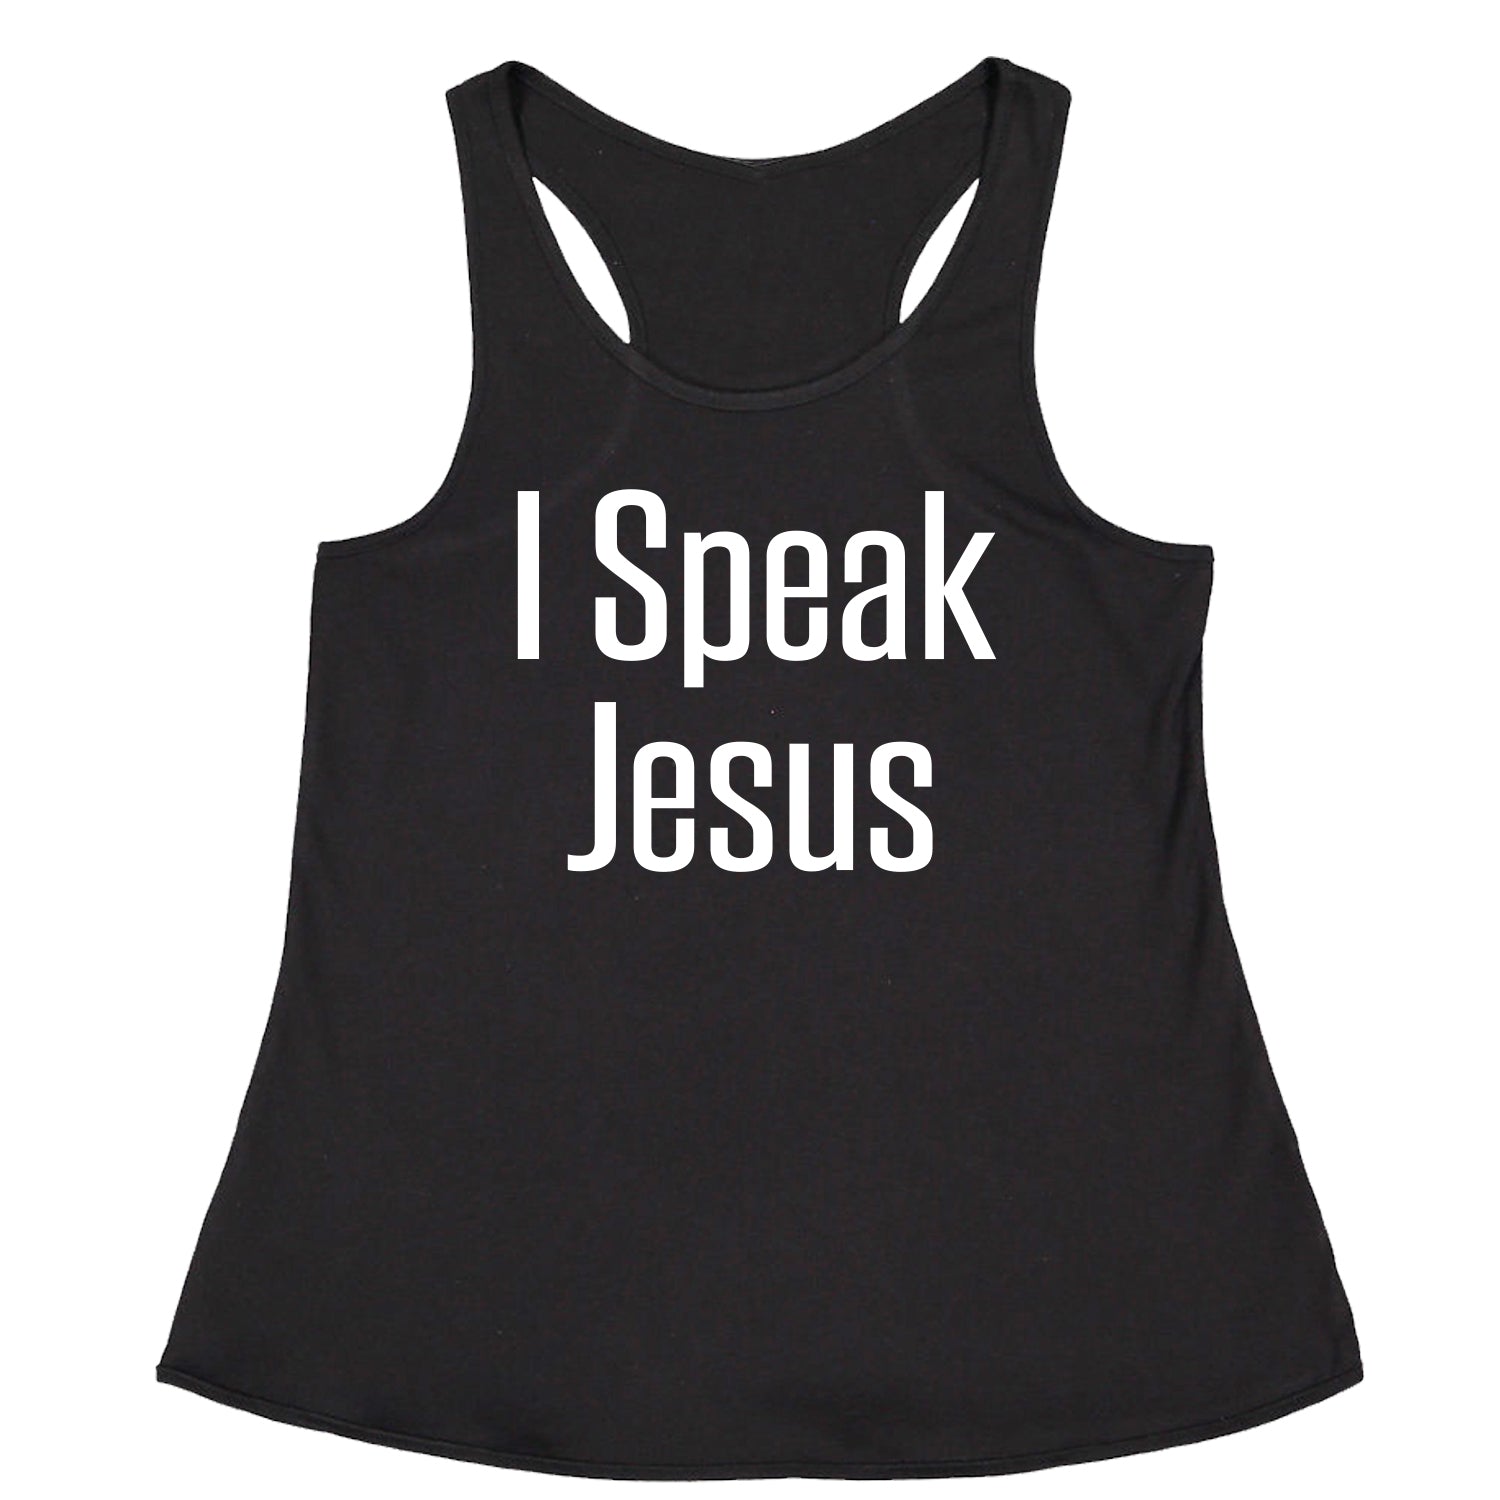 I Speak Jesus Racerback Tank Top for Women catholic, charity, christ, christian, christianity, city, concert, gayle, heaven, in, maverick, only, praise, scars, worship by Expression Tees